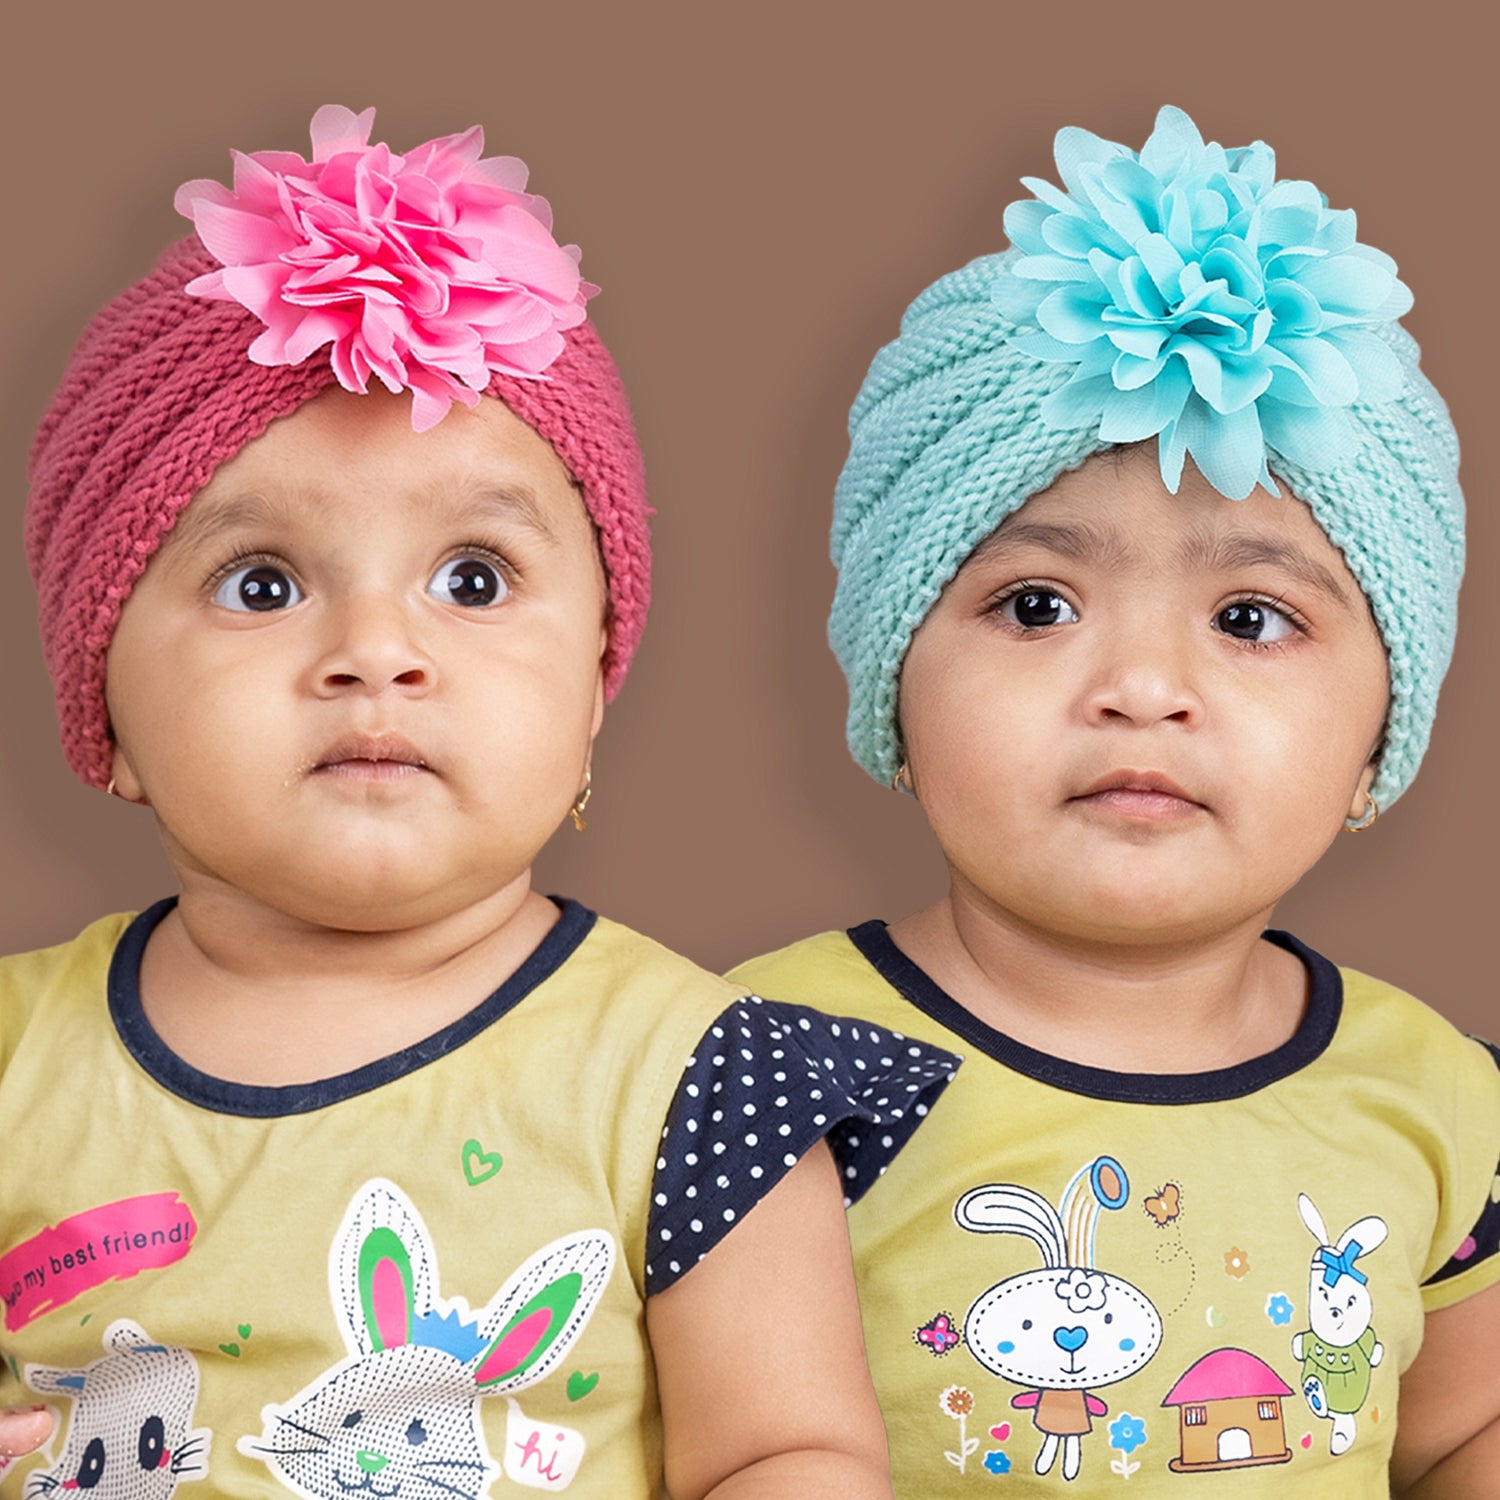 Baby Moo Girls Floral Petals 2 Pack Knitted Turban Caps - Turquoise, Maroon